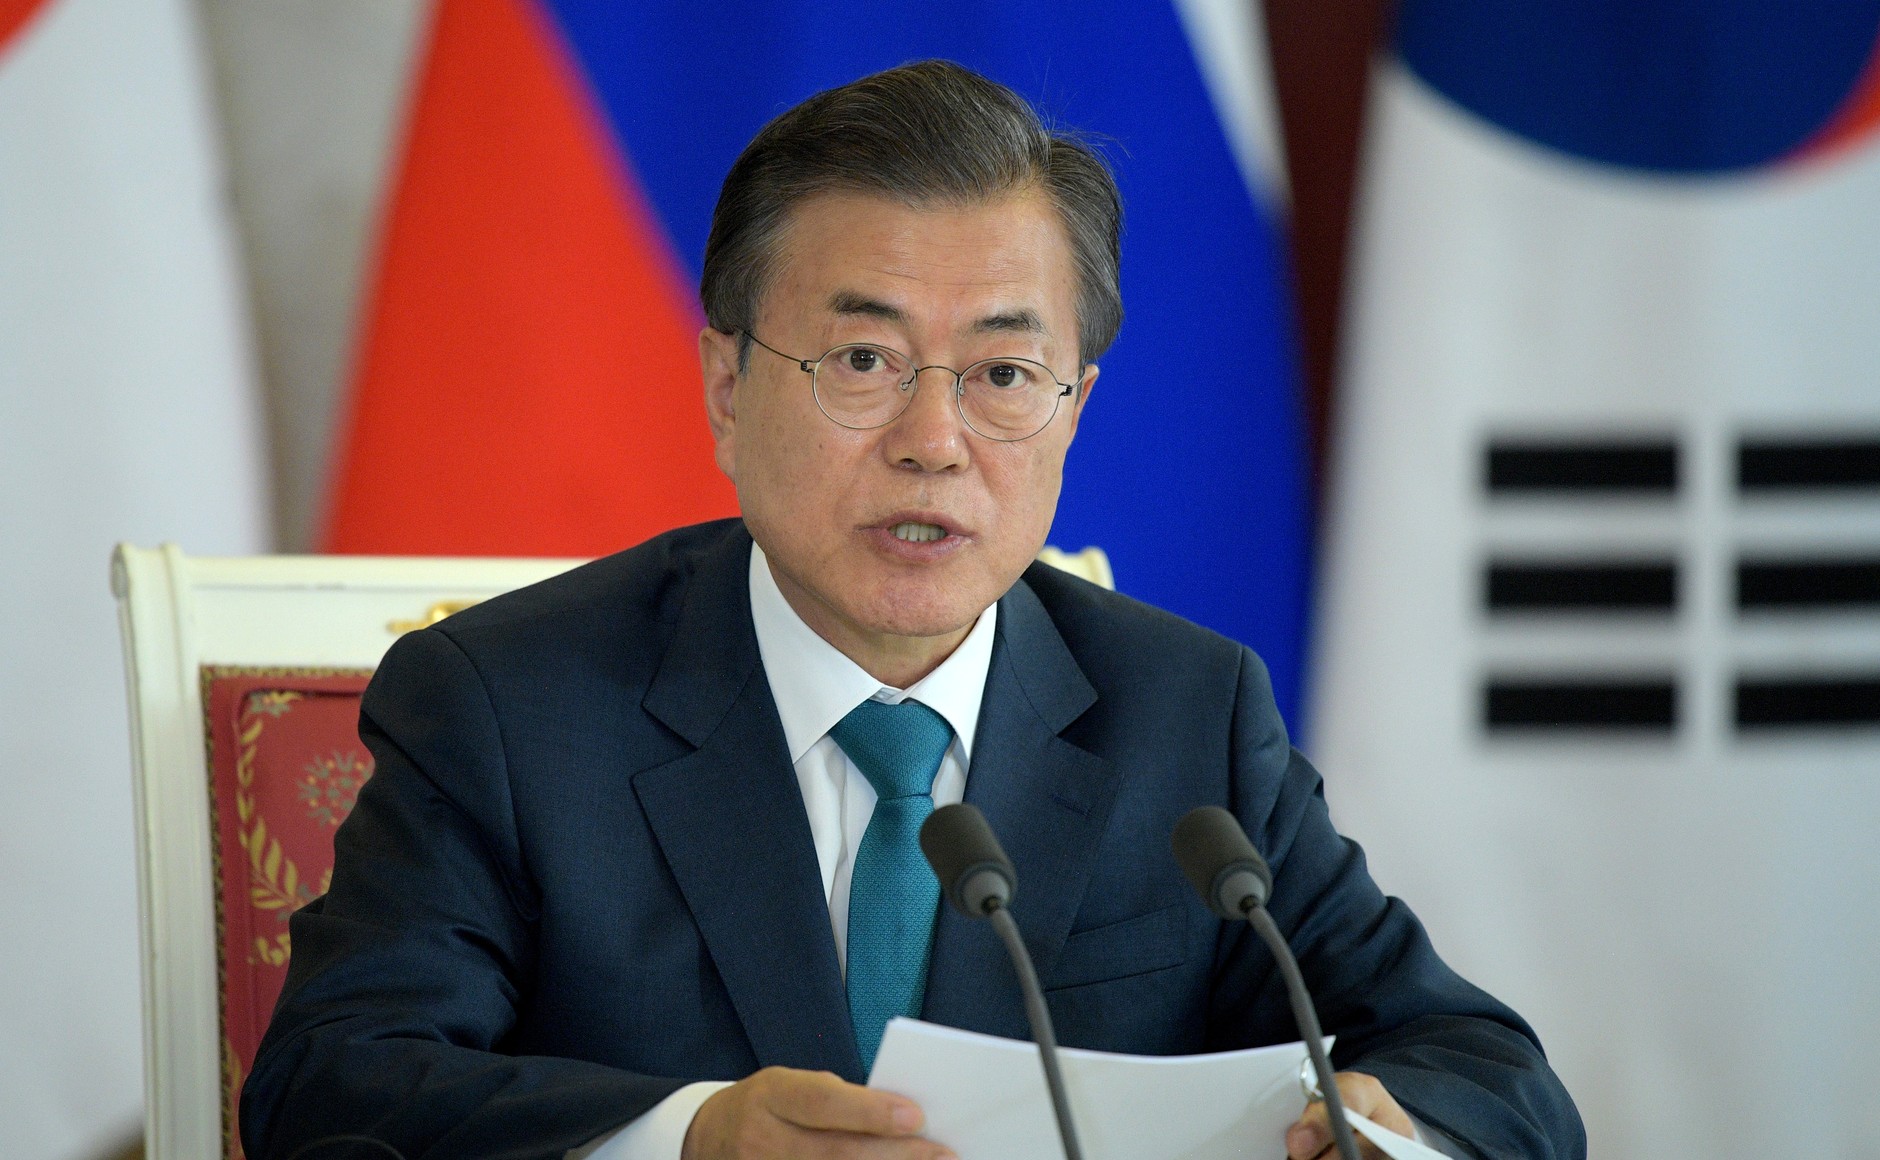 UPDATE 4-S.Korea's Moon says situation "very grave" as mass virus tests get going